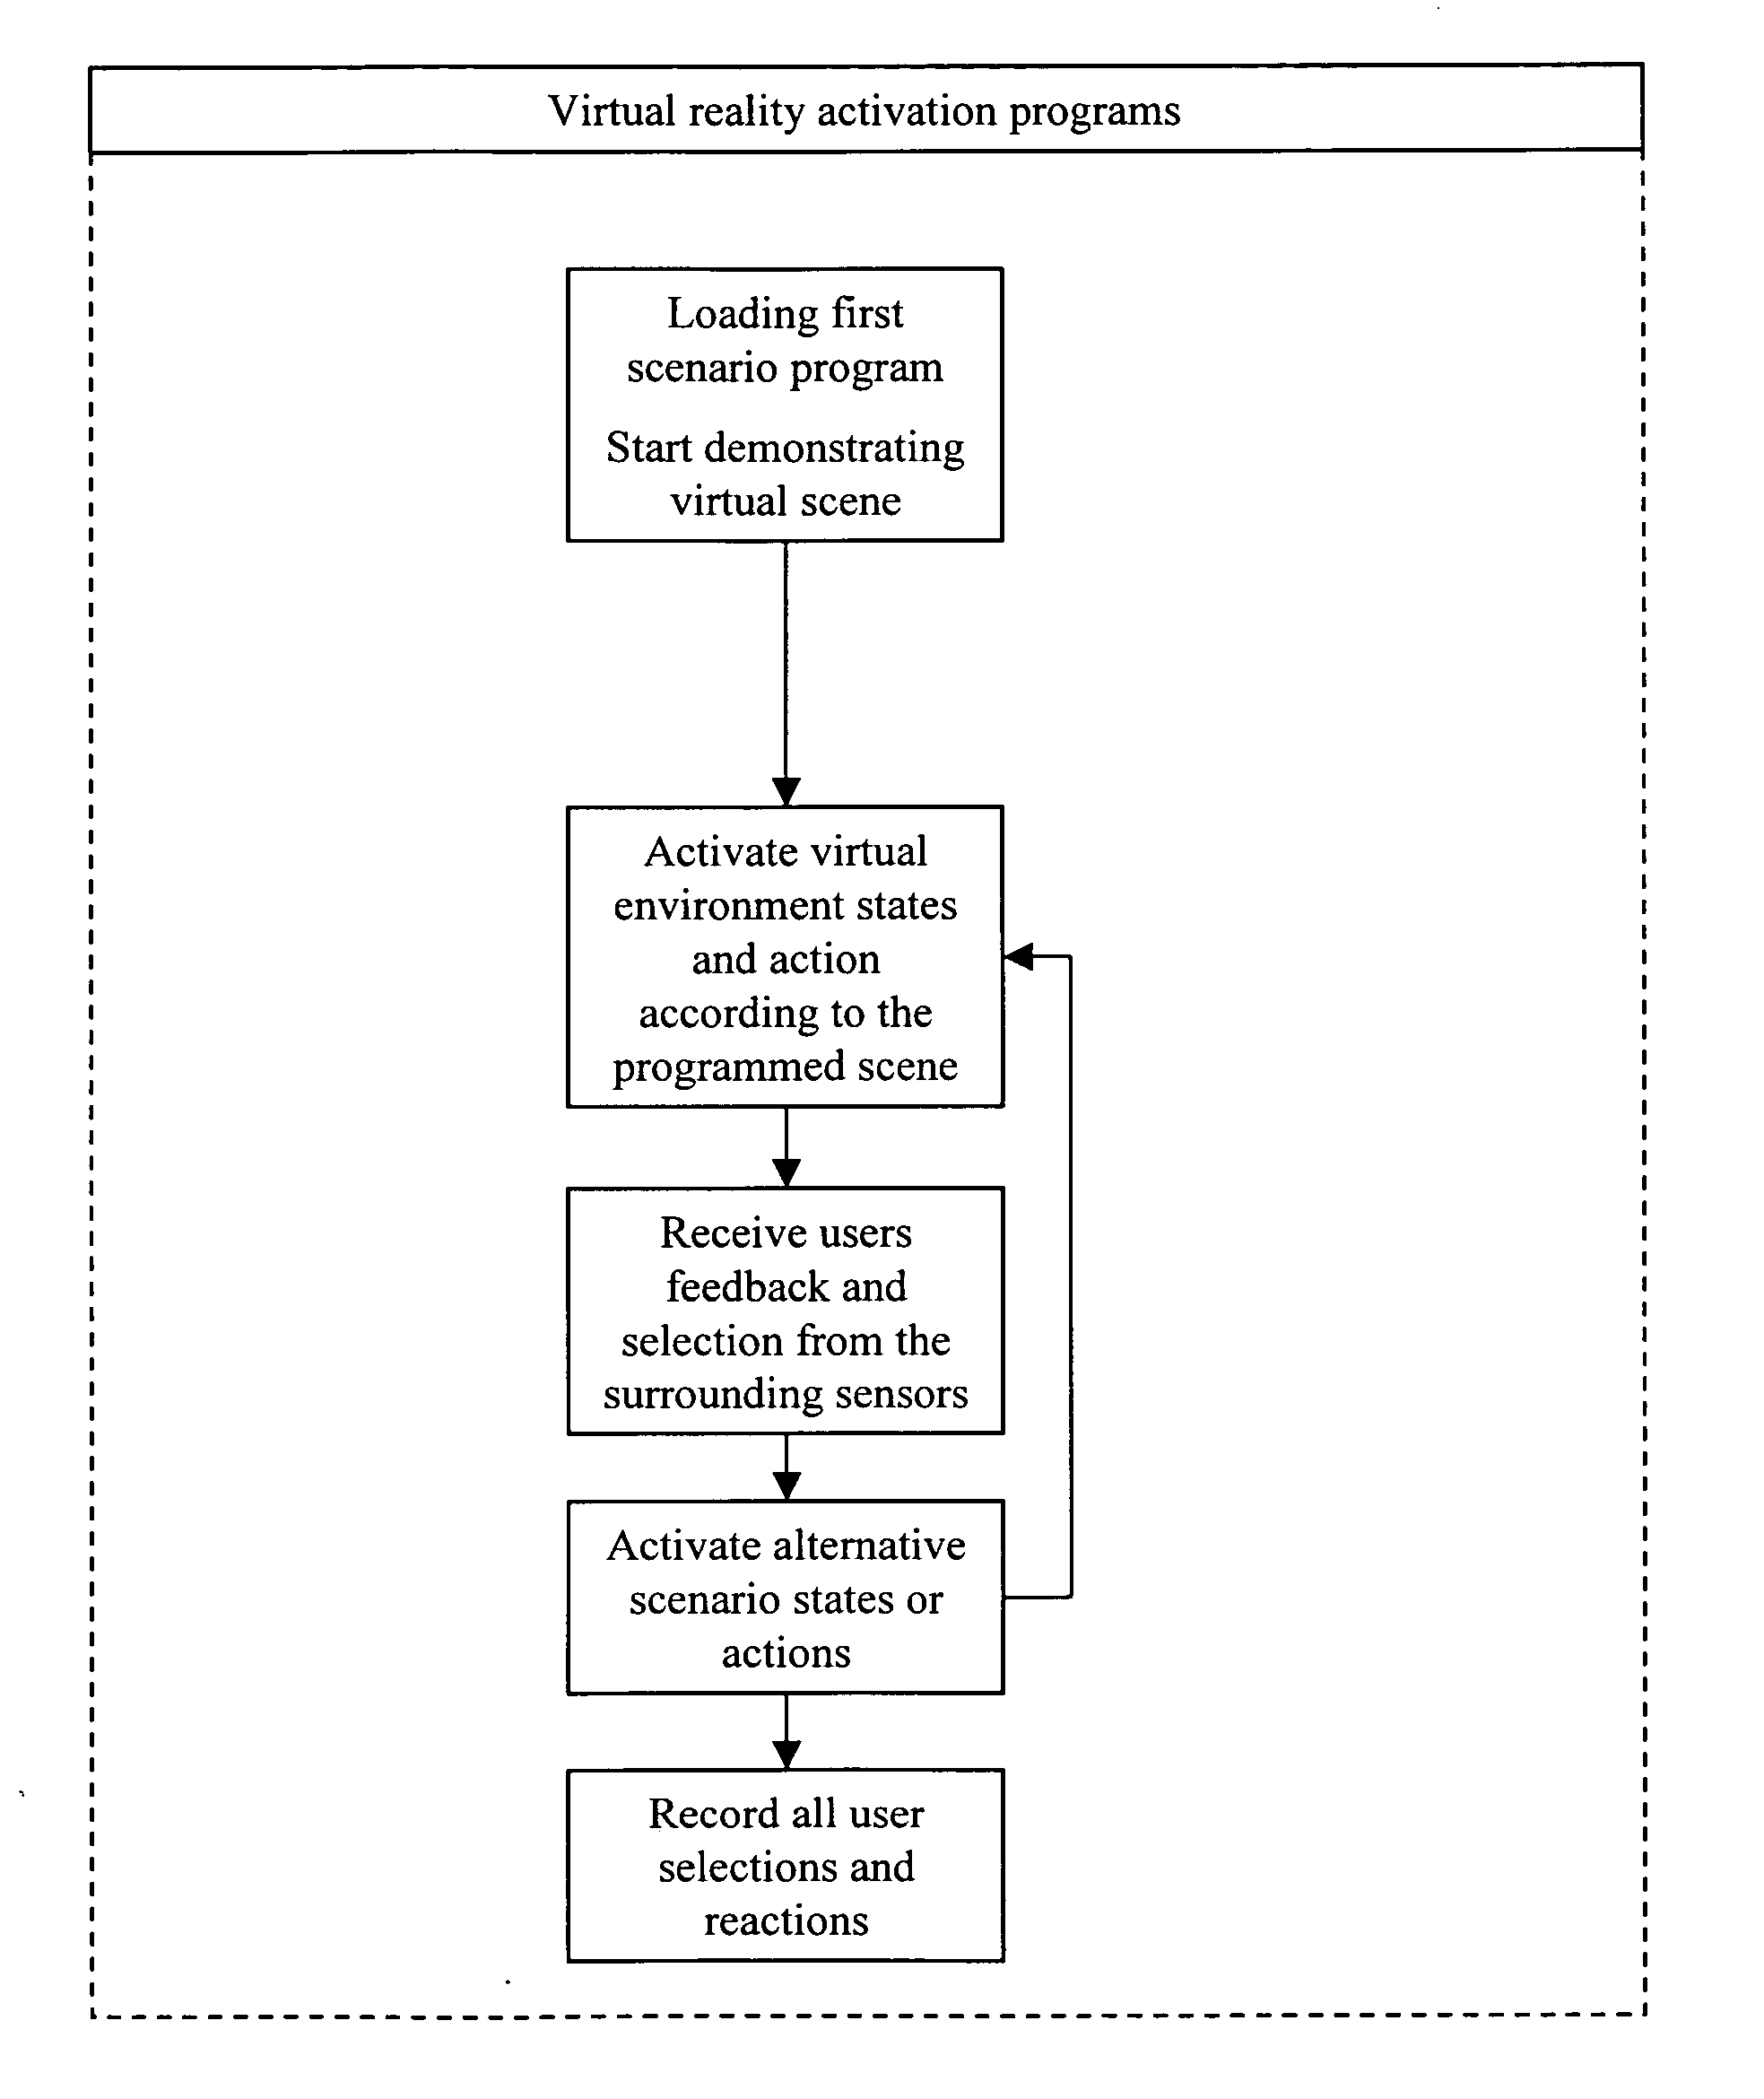 System and method for diagnosis of mental disorders